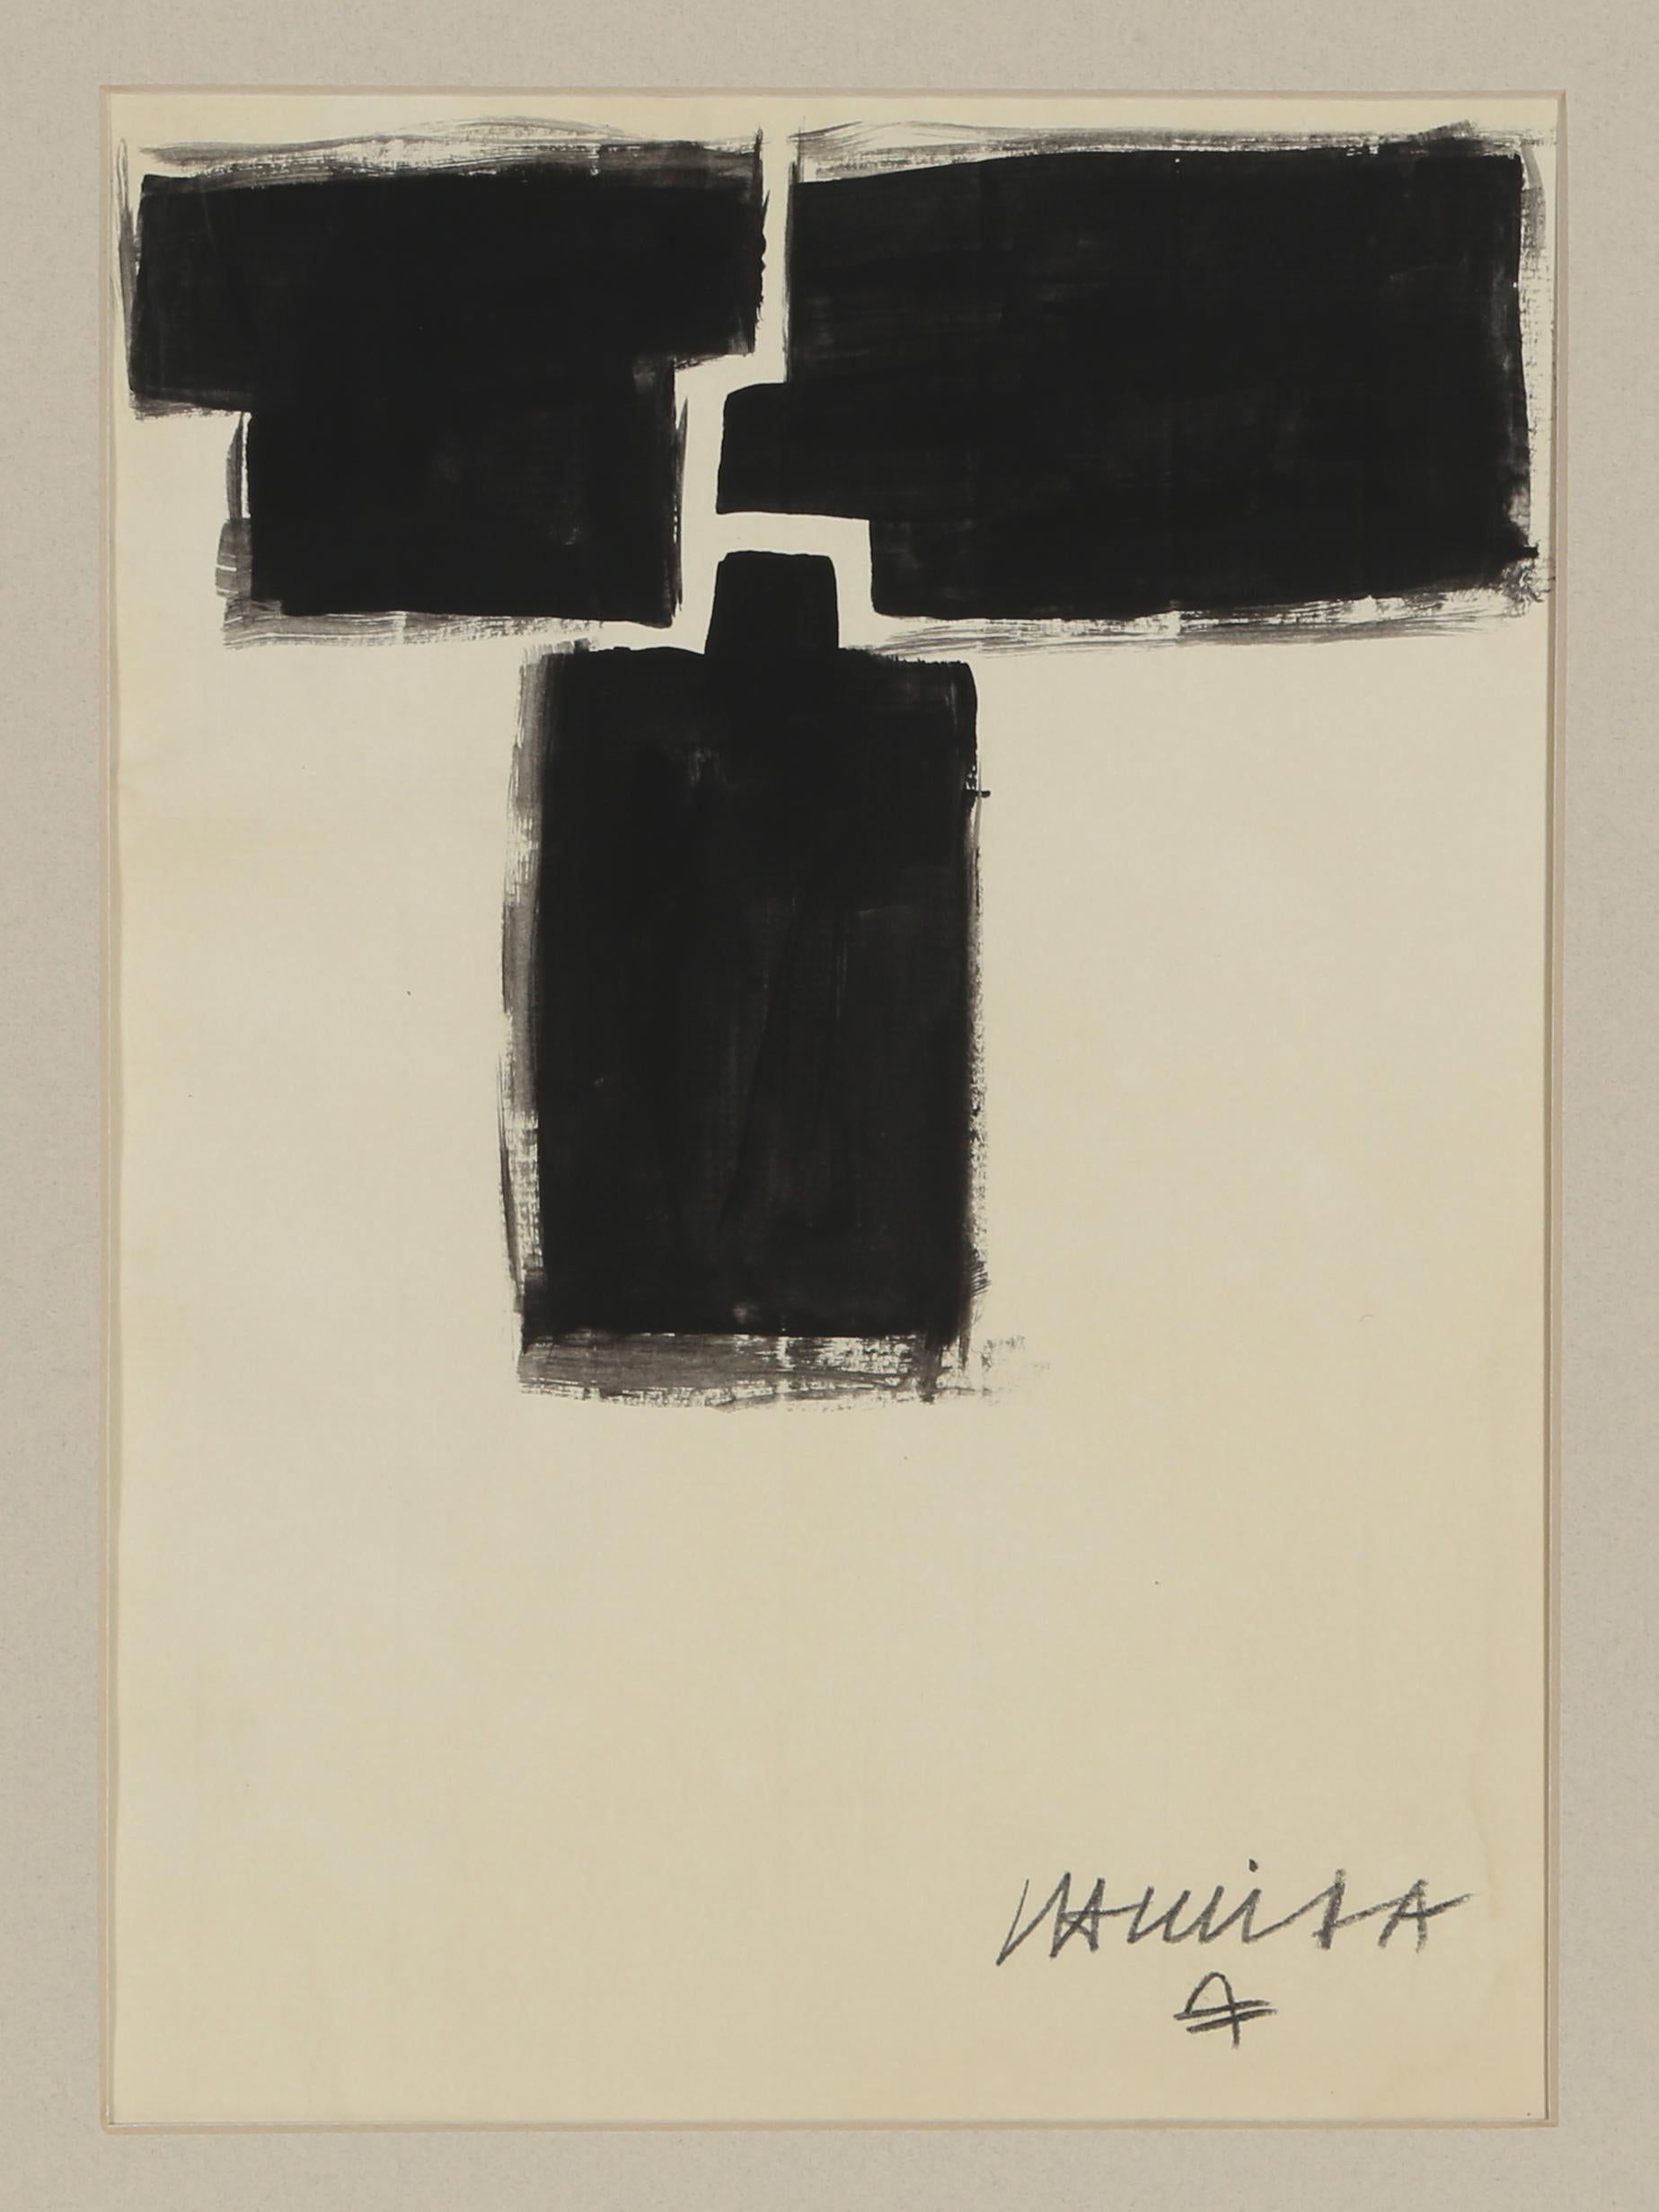 Eduardo Chillida, Spanish (1924–2002)
India Ink, brush on laid paper, signed lower right
Size: 11.5 x 8 inches
Frame Size: 17 x 13.7 inches